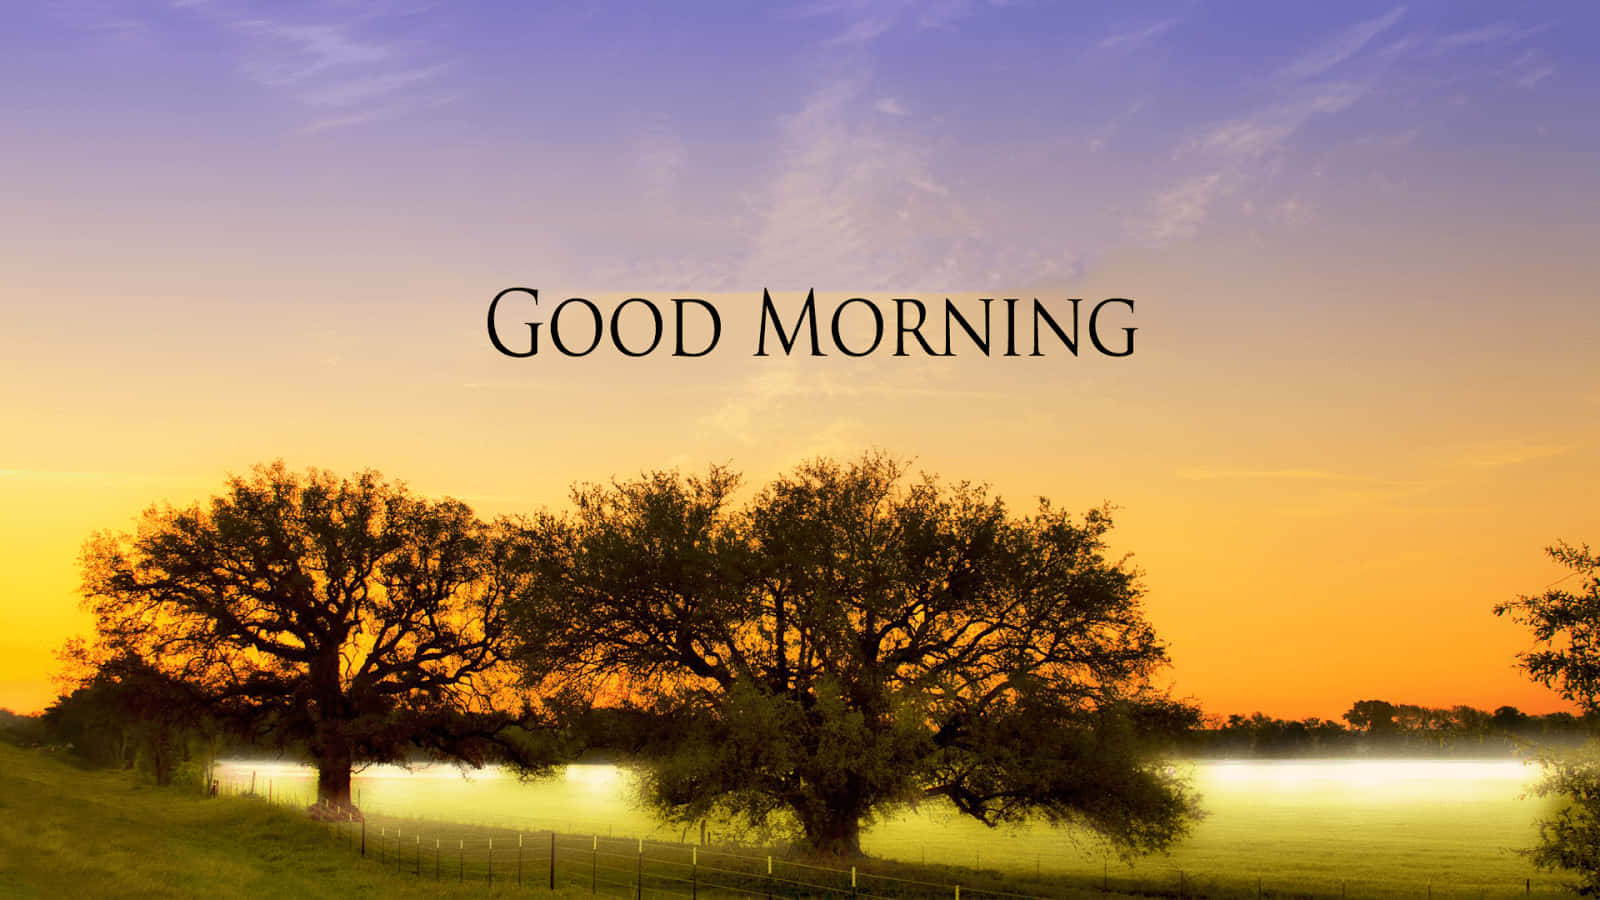 Free Good Morning Wallpaper Downloads, [100+] Good Morning Wallpapers for  FREE 